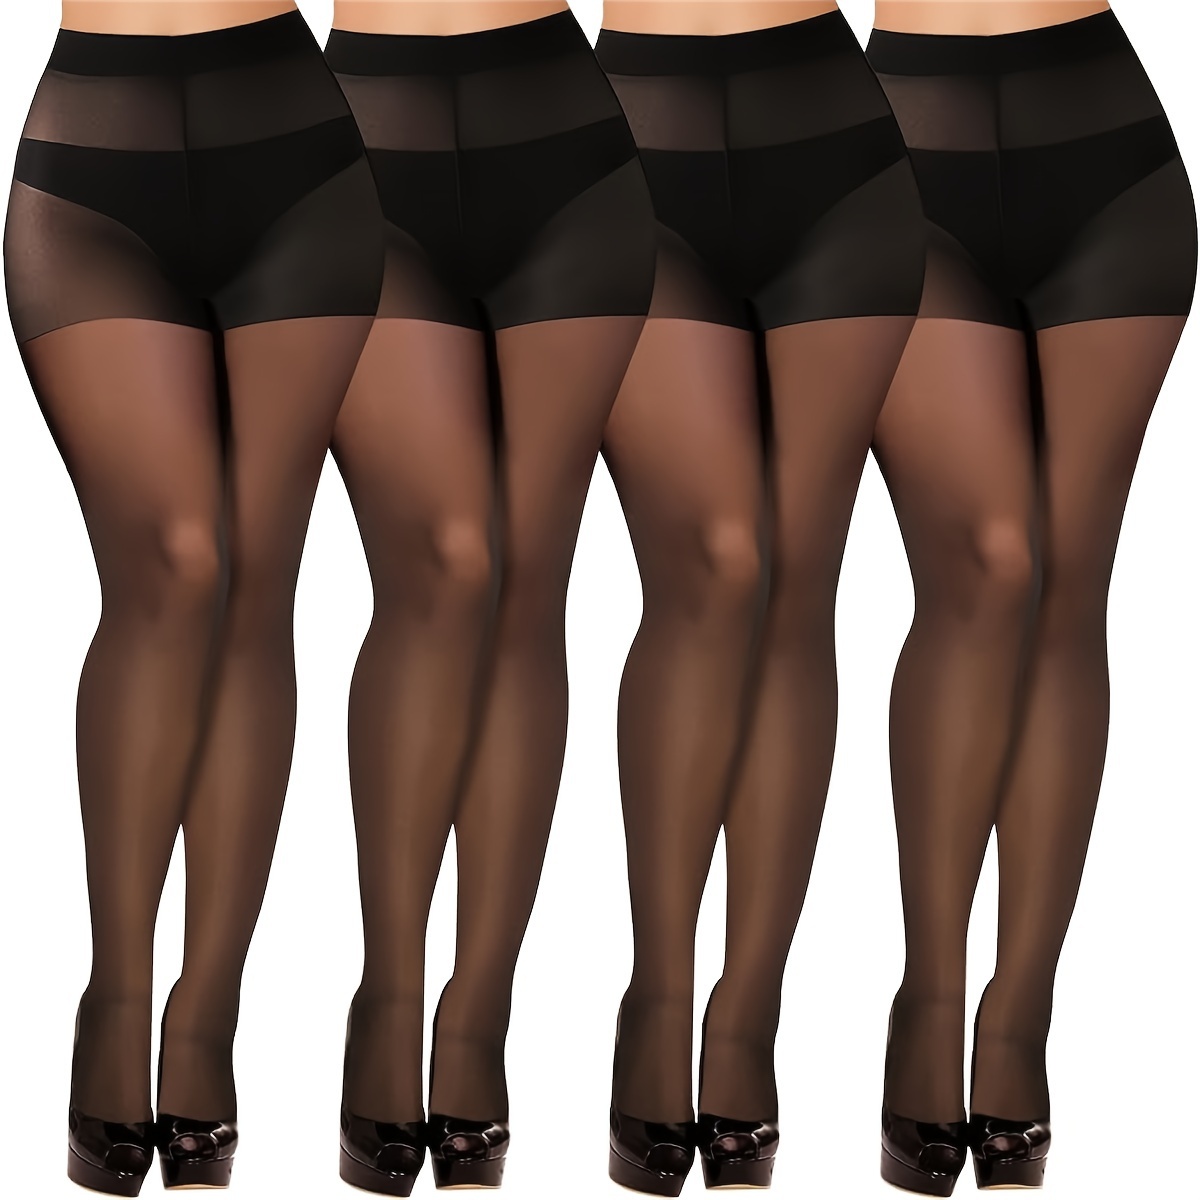 Luiwoon Super Durable Plus Size Tights, High Waist Control Top